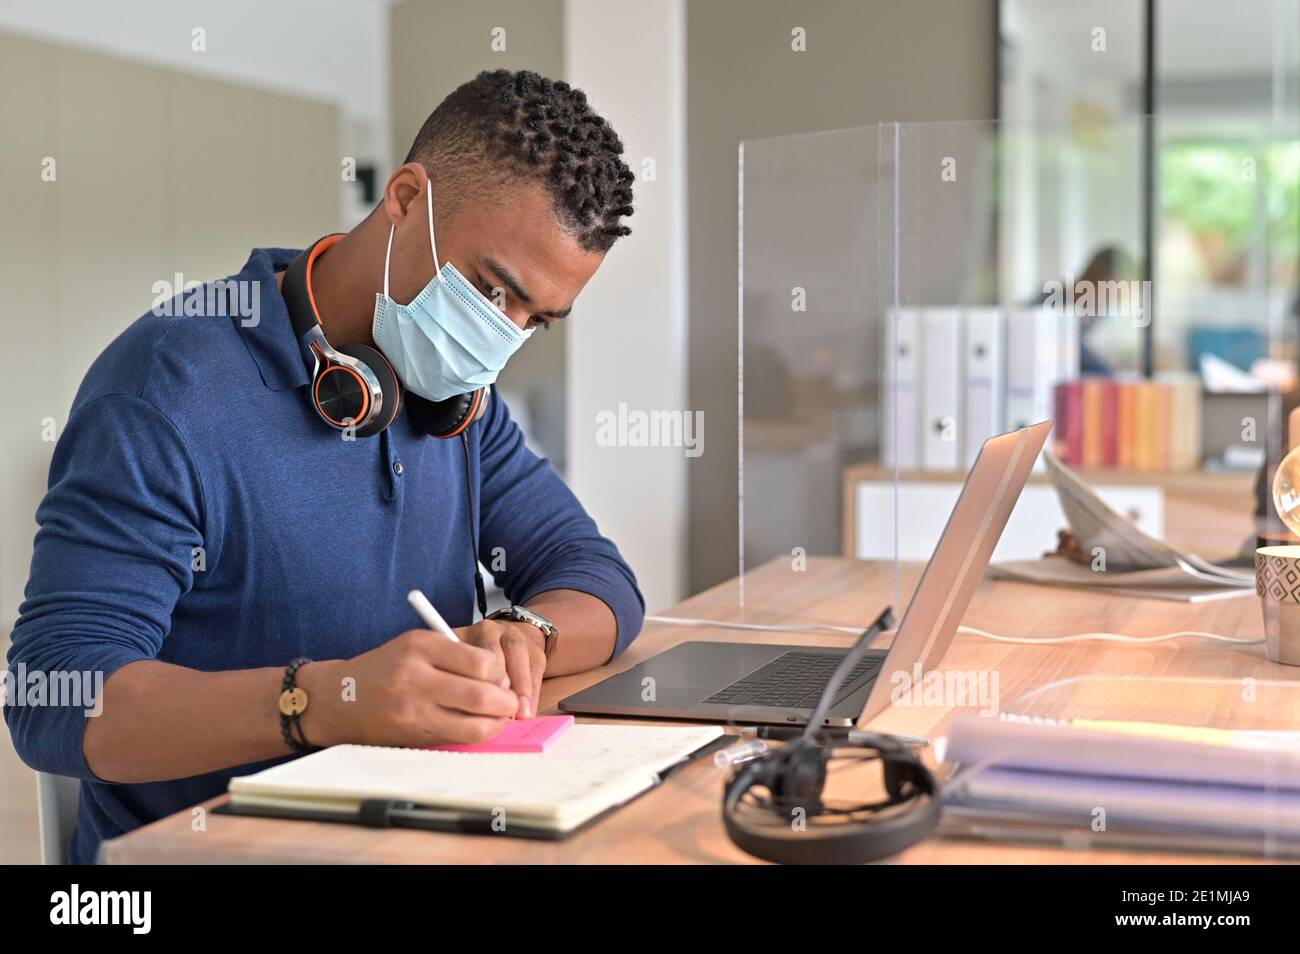 Office-worker in open-space office protected by plexiglas, wearing surgical face mask Stock Photo